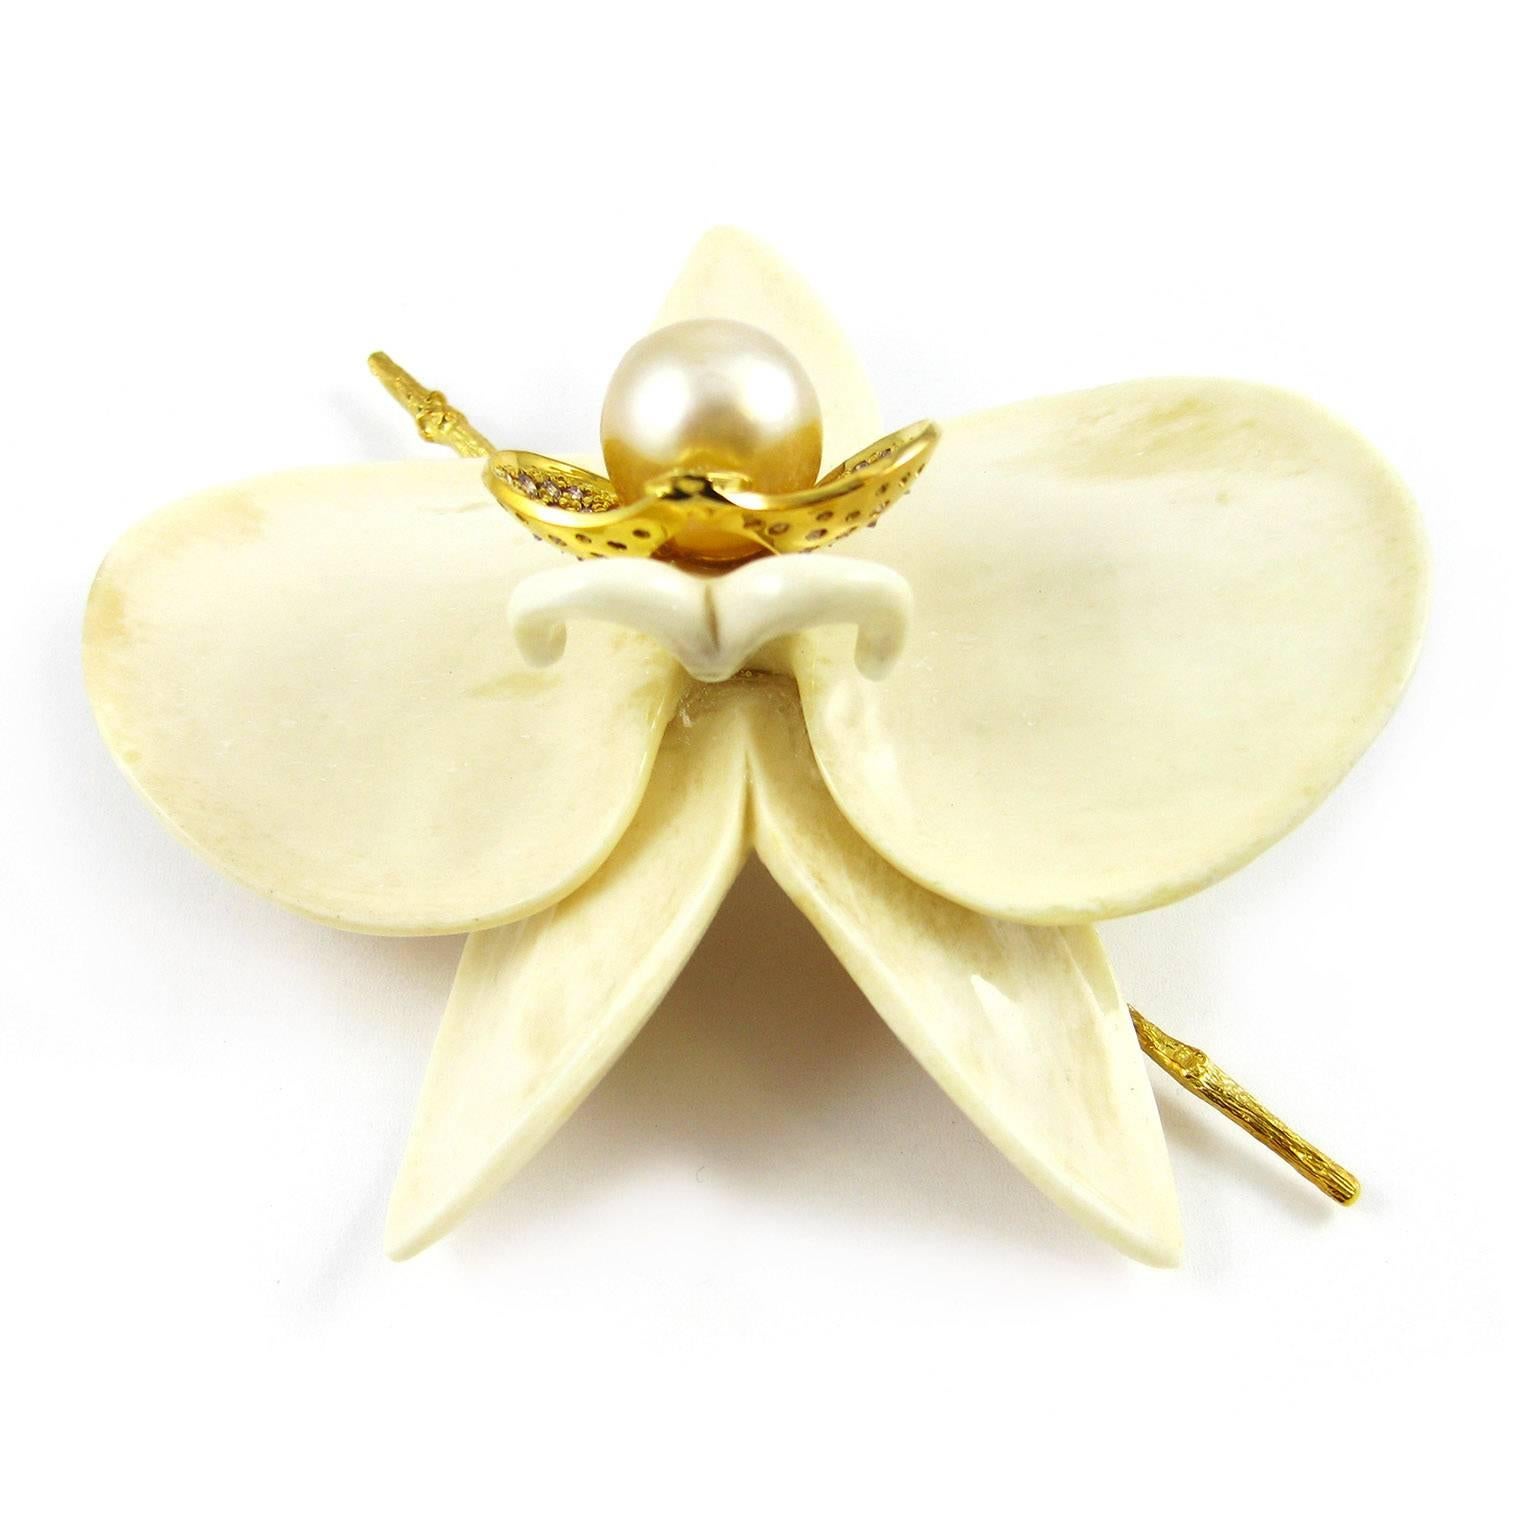 From the tropical garden of K. Brunini's Objects Organique collection comes this large orchid brooch blooming on an 18K gold twig. Each petal, made of polished and refined bone, gathers beneath a pillow of 18K yellow gold studded with approximately